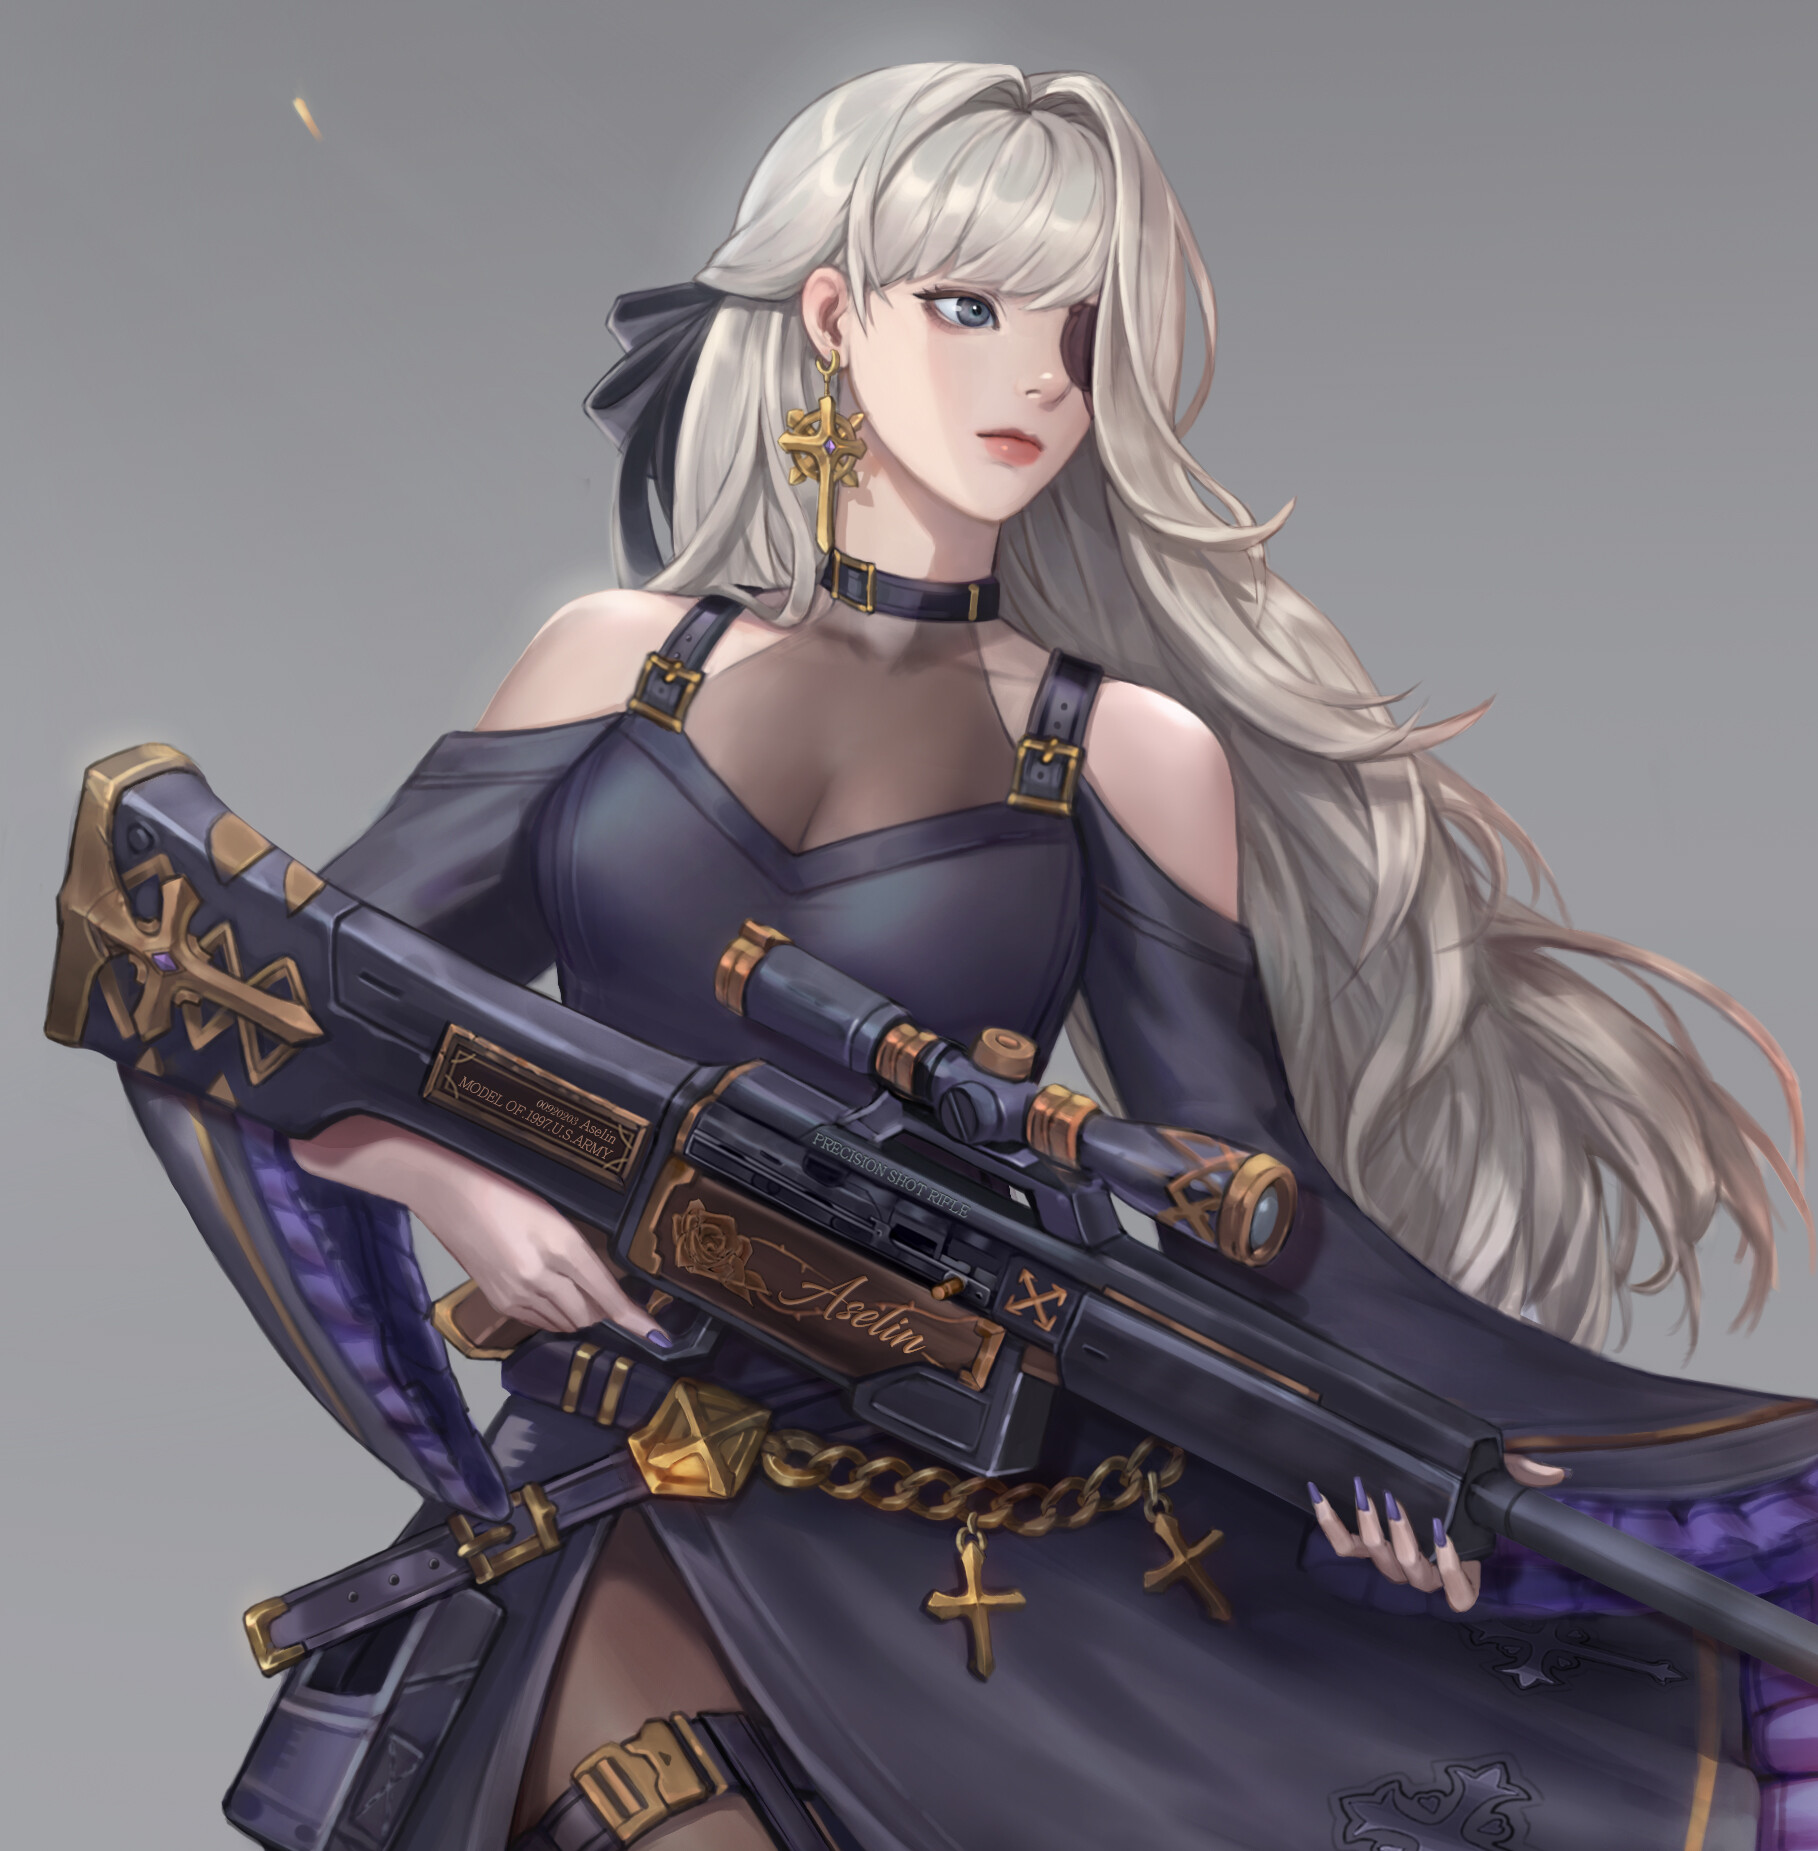 Discuzz ArtStation Anime Anime Girls Long Hair Weapon Eyepatches Rifles Sniper Rifle Girls With Guns 1818x1851